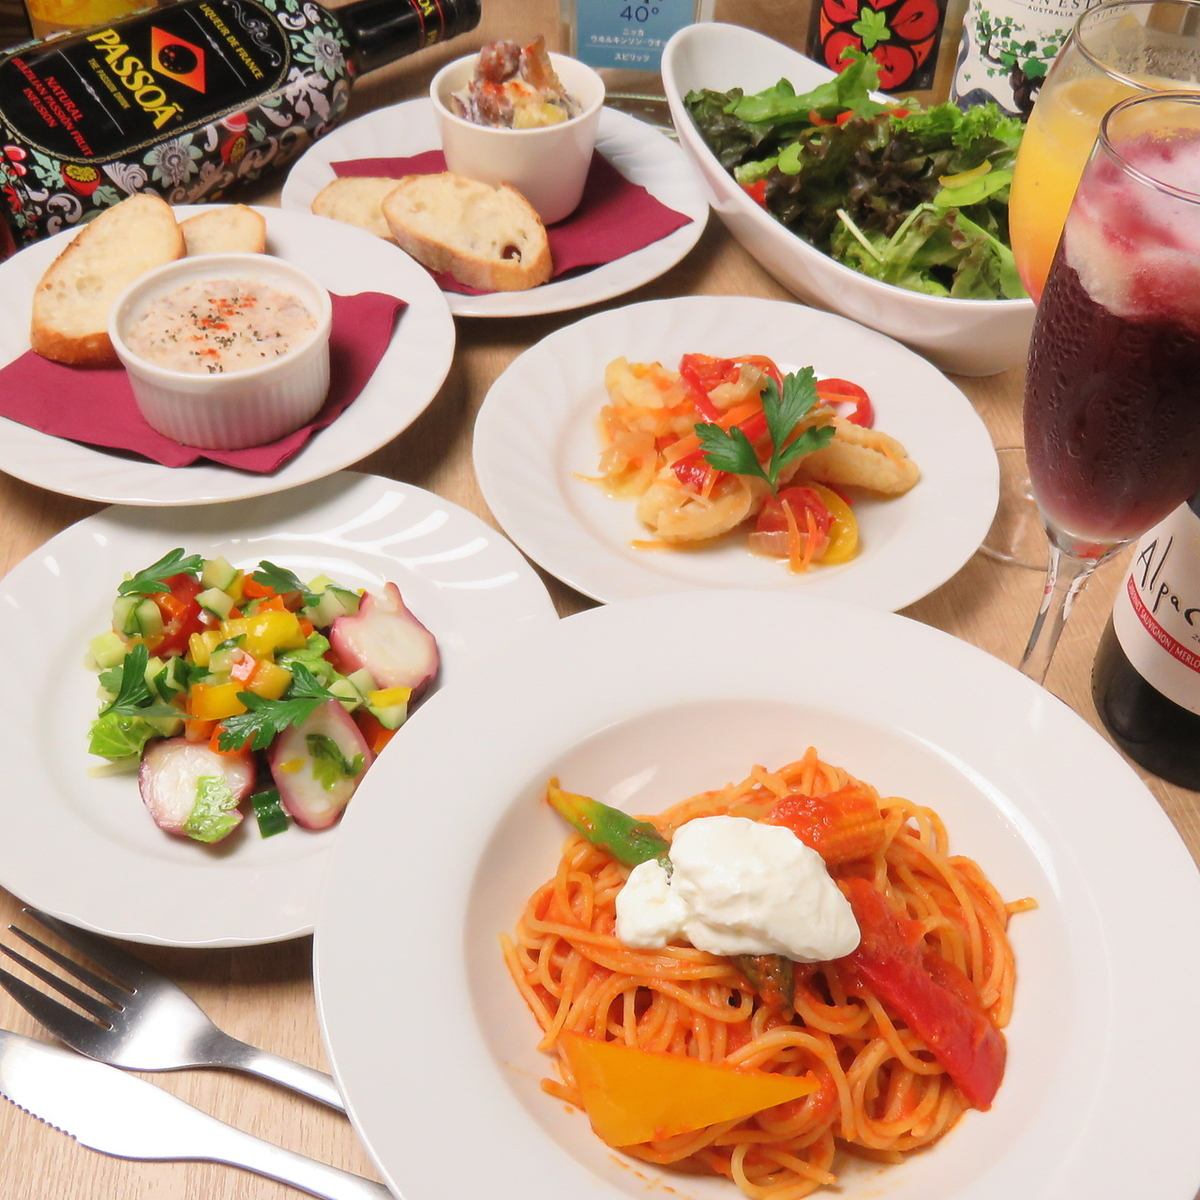 Popular 2-hour all-you-can-drink French course with surprise plate 3,000 yen